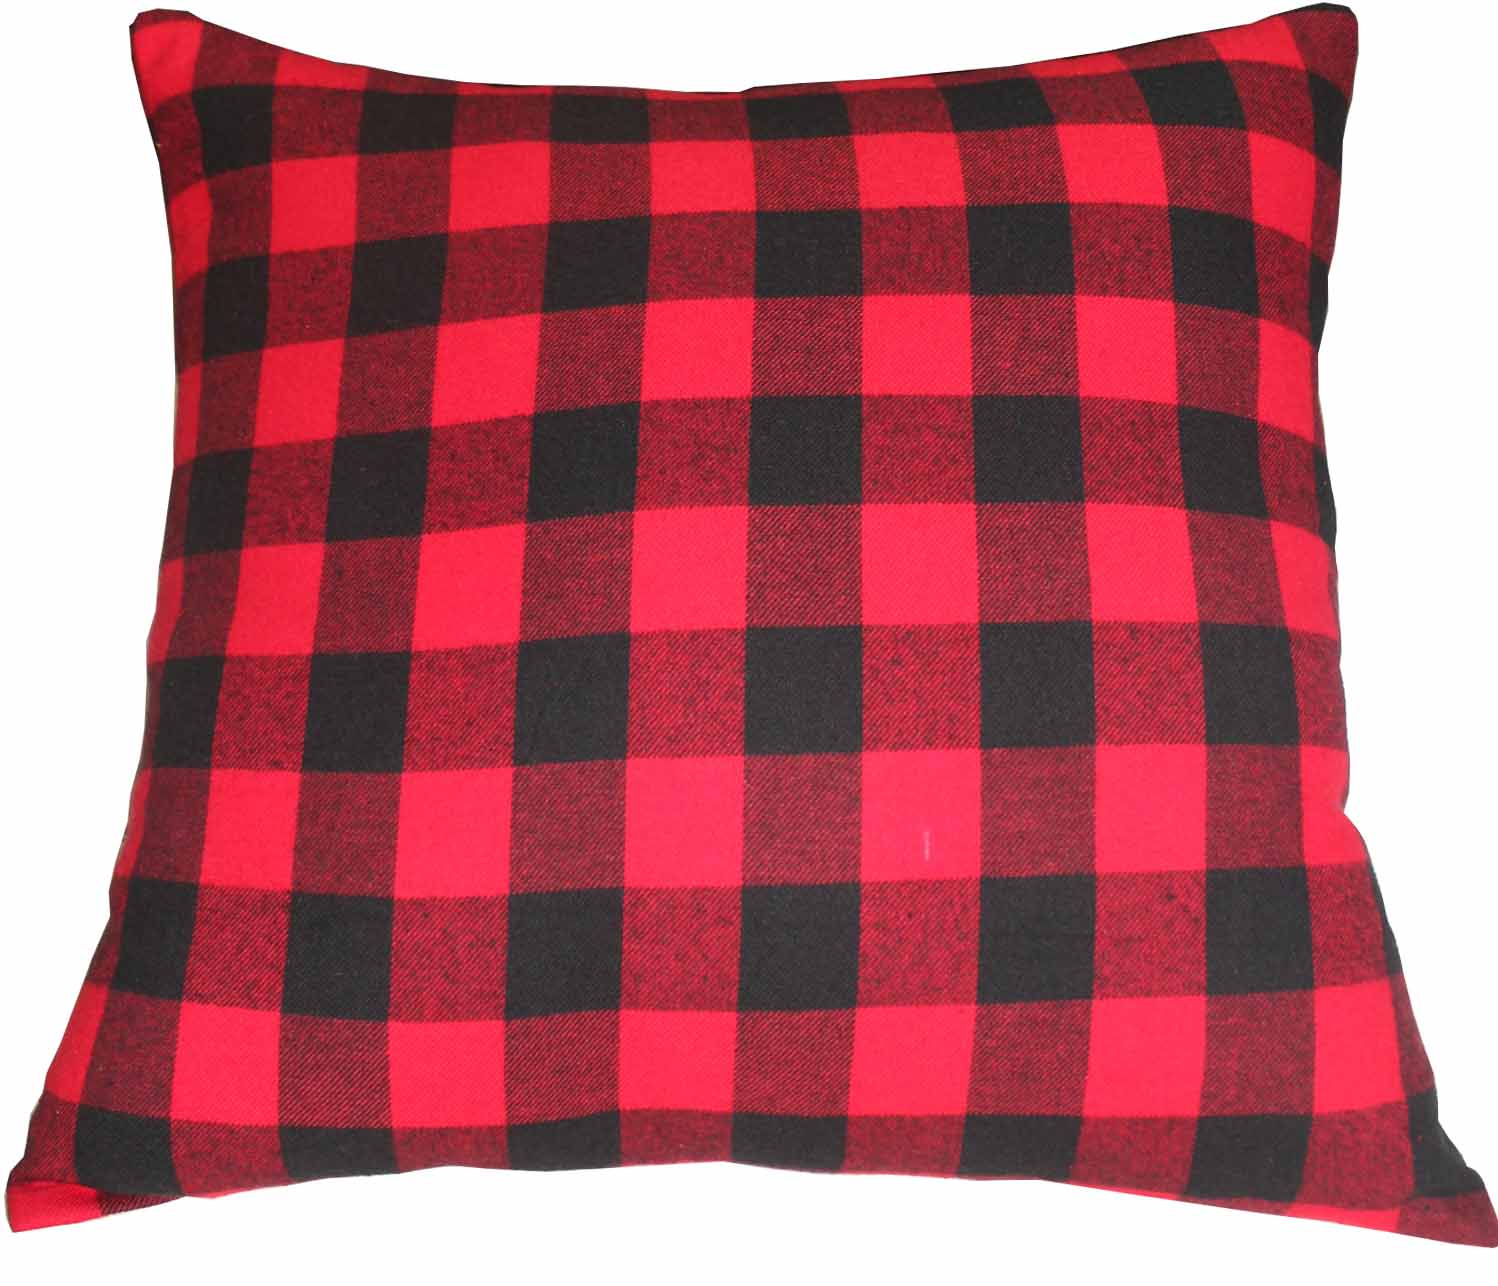 Red and Black Twill Buffalo Check,Fabric Toss Pillow 16"W x 16"L,Standard